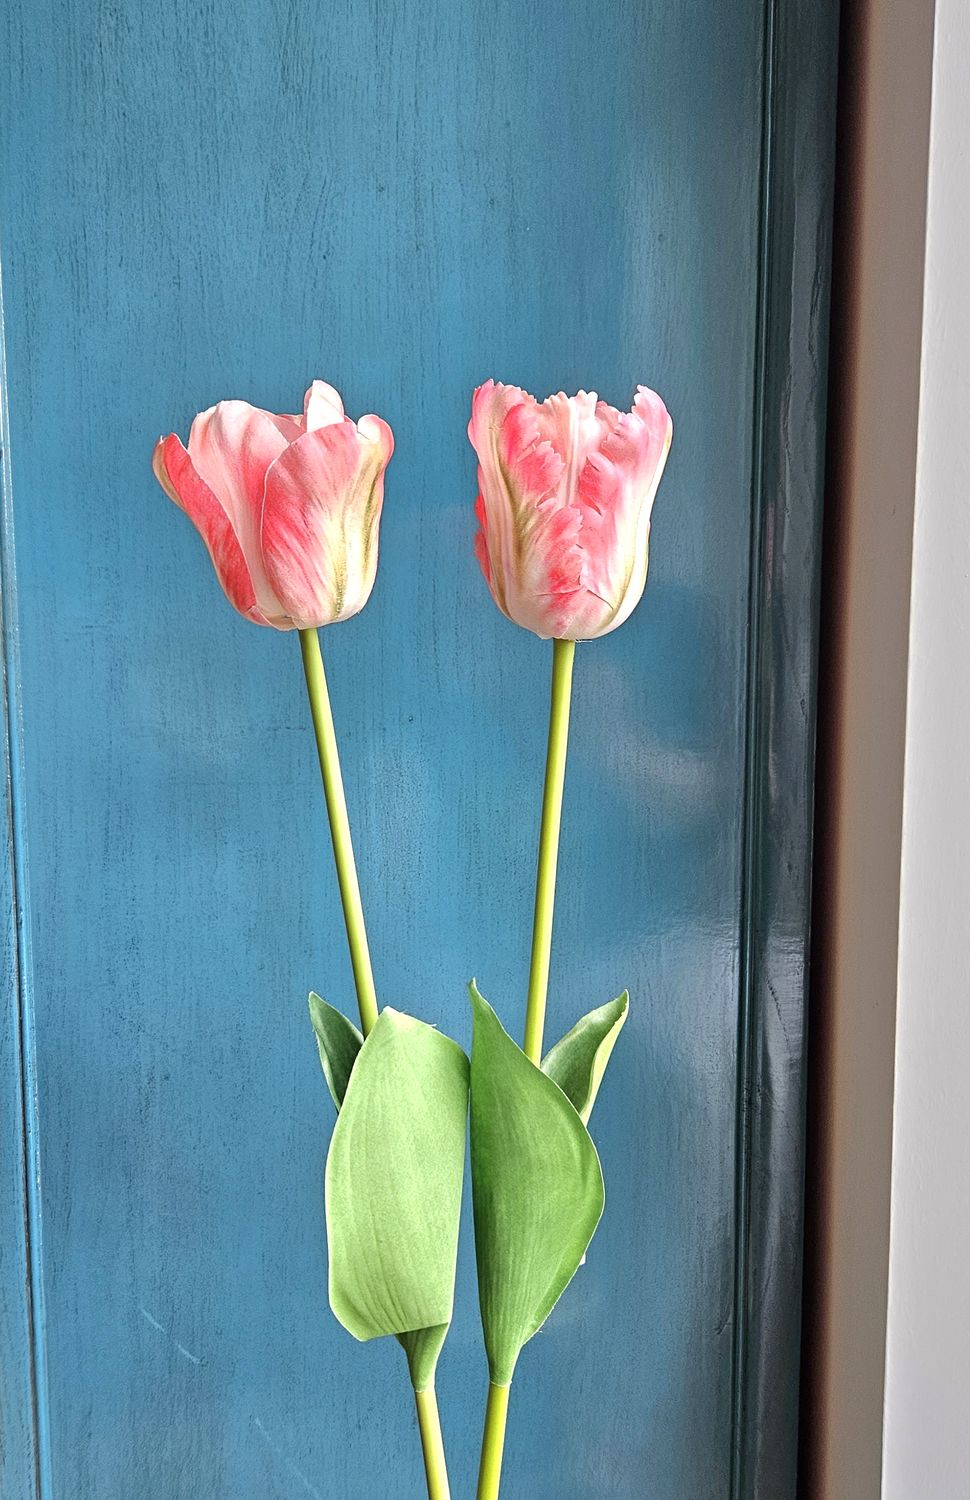 Kunstpapageietulpe, 'Deluxe', 65 cm, Real Touch, rosa